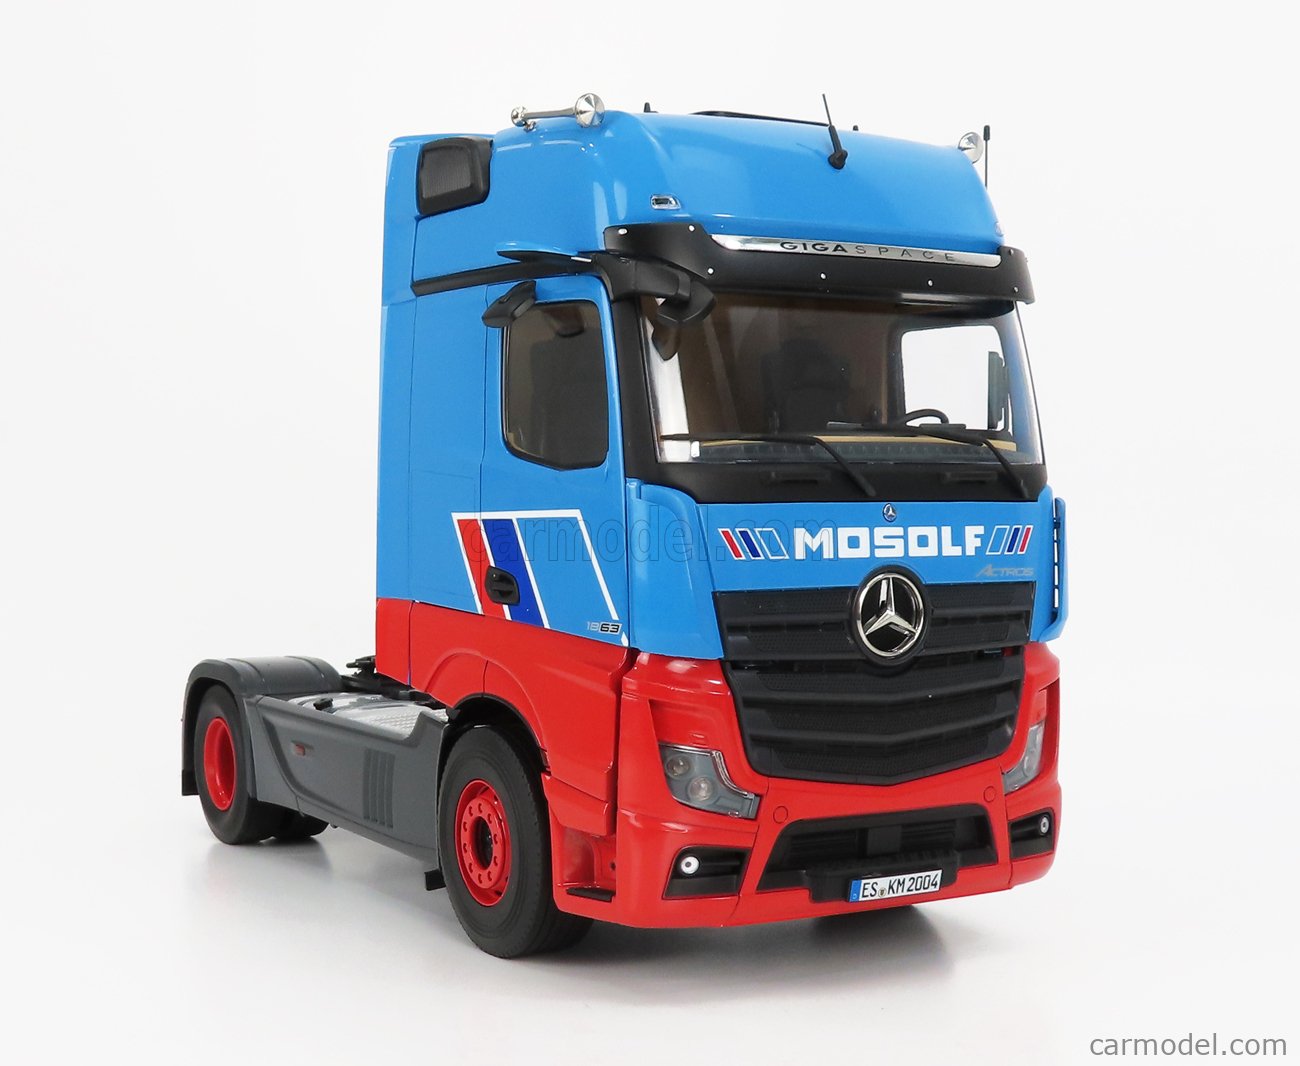 NZG LM10250001 Scale 1/18 MERCEDES BENZ ACTROS 1863 GIGASPACE 4x2  MIRRORCAM TRUCK CAR TRANSPORTER MOSOLF 2018 LIGHT BLUE RED